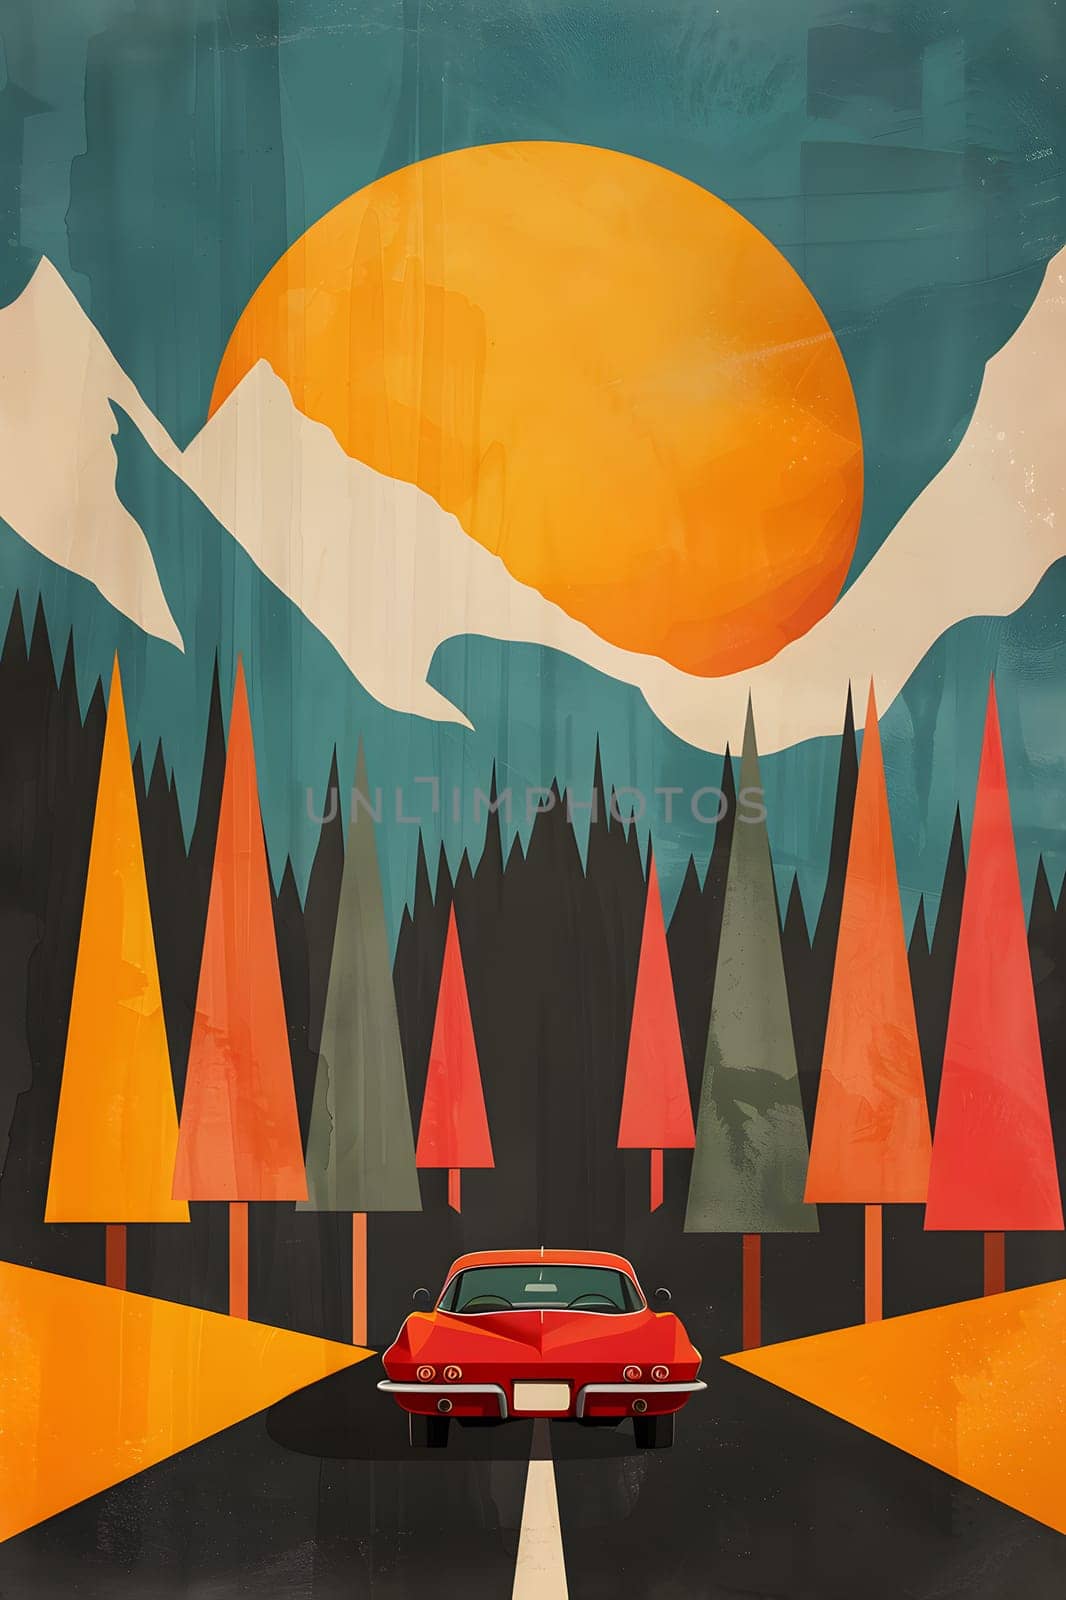 An orange car adorned with artistic automotive lighting is cruising along a road surrounded by trees and mountains, creating a picturesque painting of an automotive design in the world